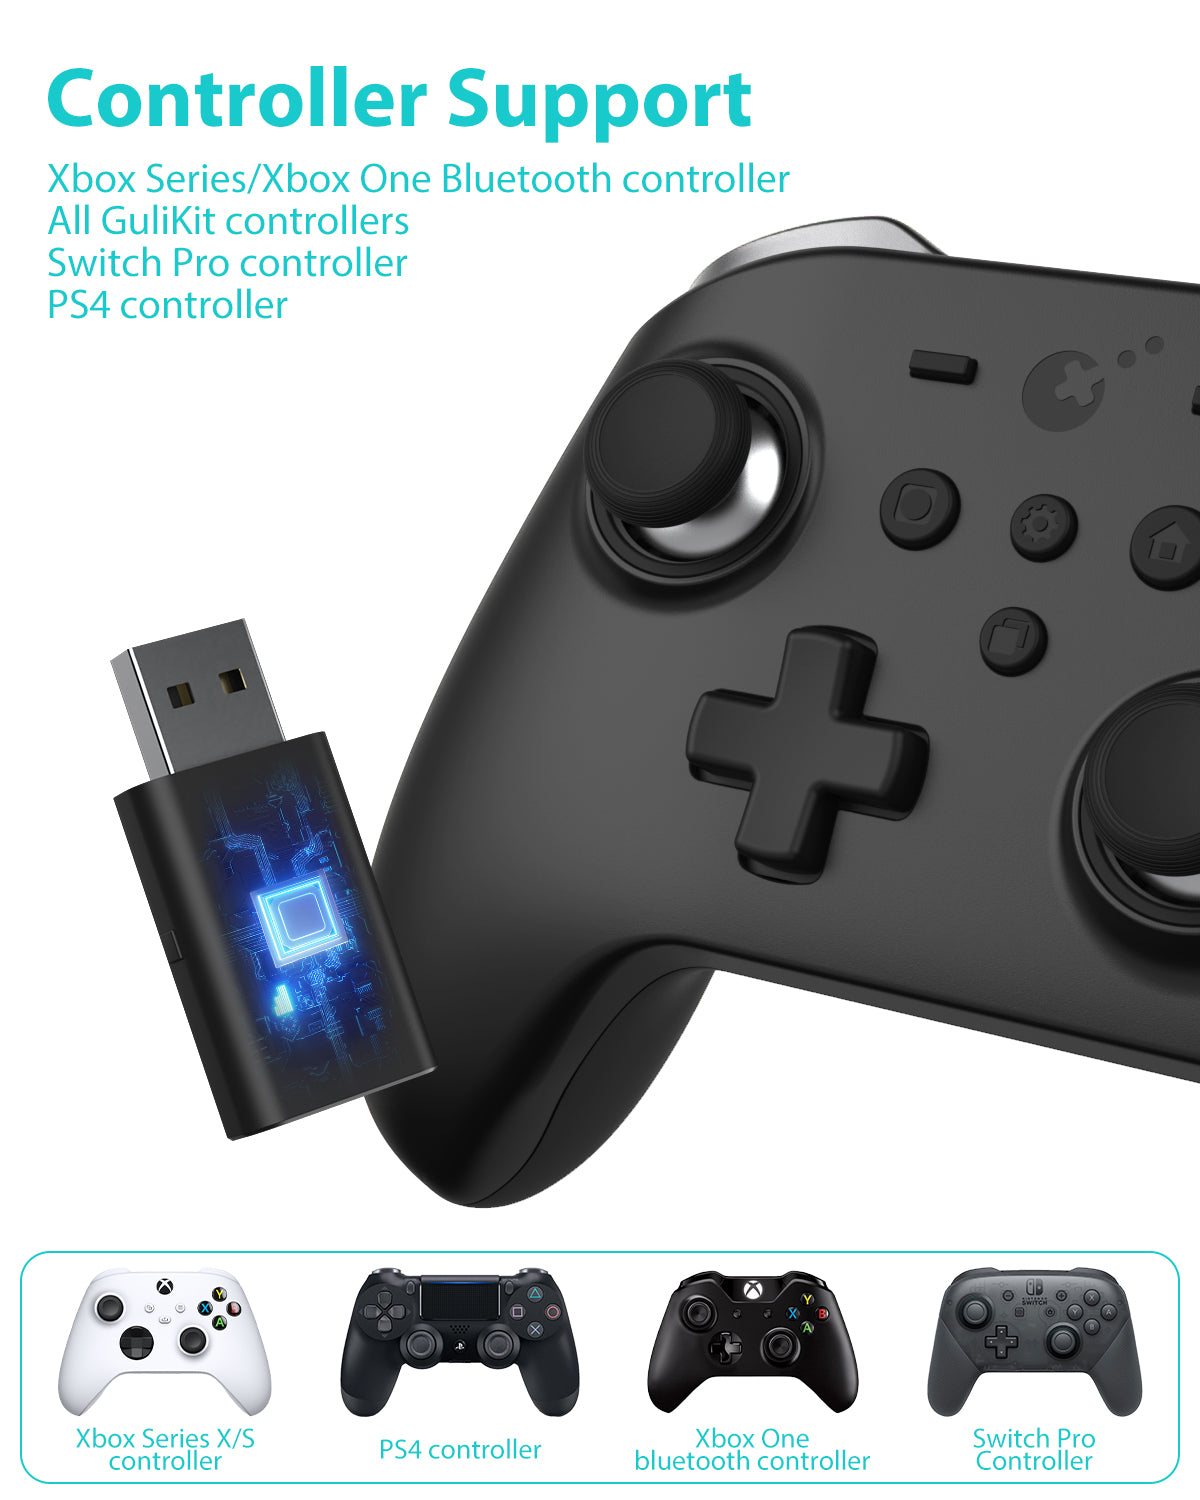 Goku Wireless Adapter, King Kong 2 Pro Controller Adapter Controller/Xbox Series/Xbox One(Bluetooth Ver.)/PS4/Switch Pro Controller, Play Controller on Xbox/PS4 Console